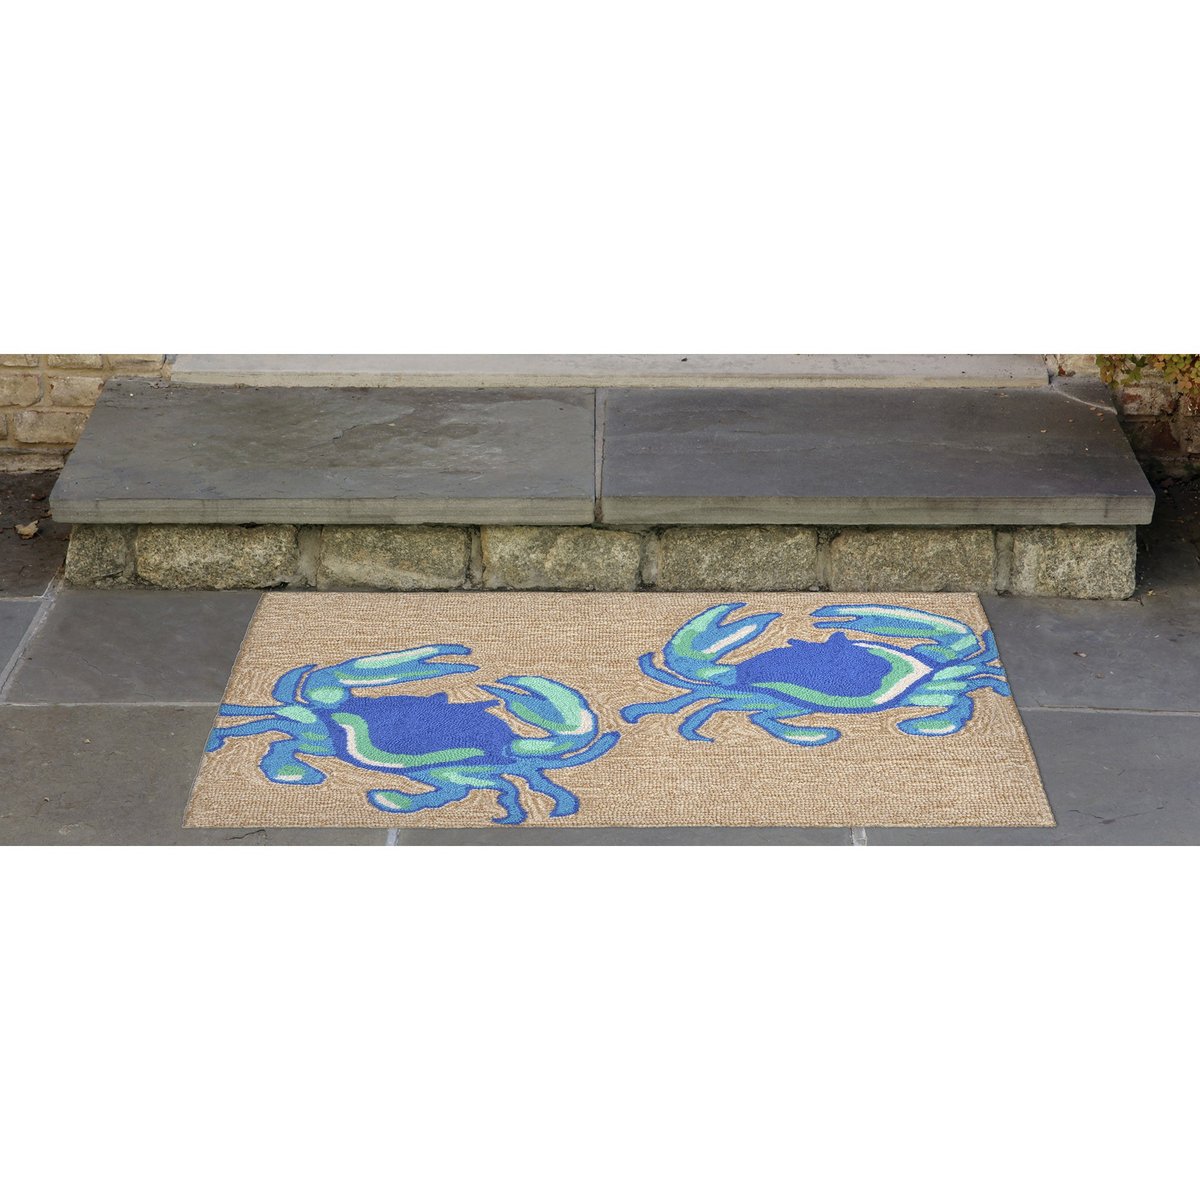 Get Crabby - Front Porch Rug Ideas